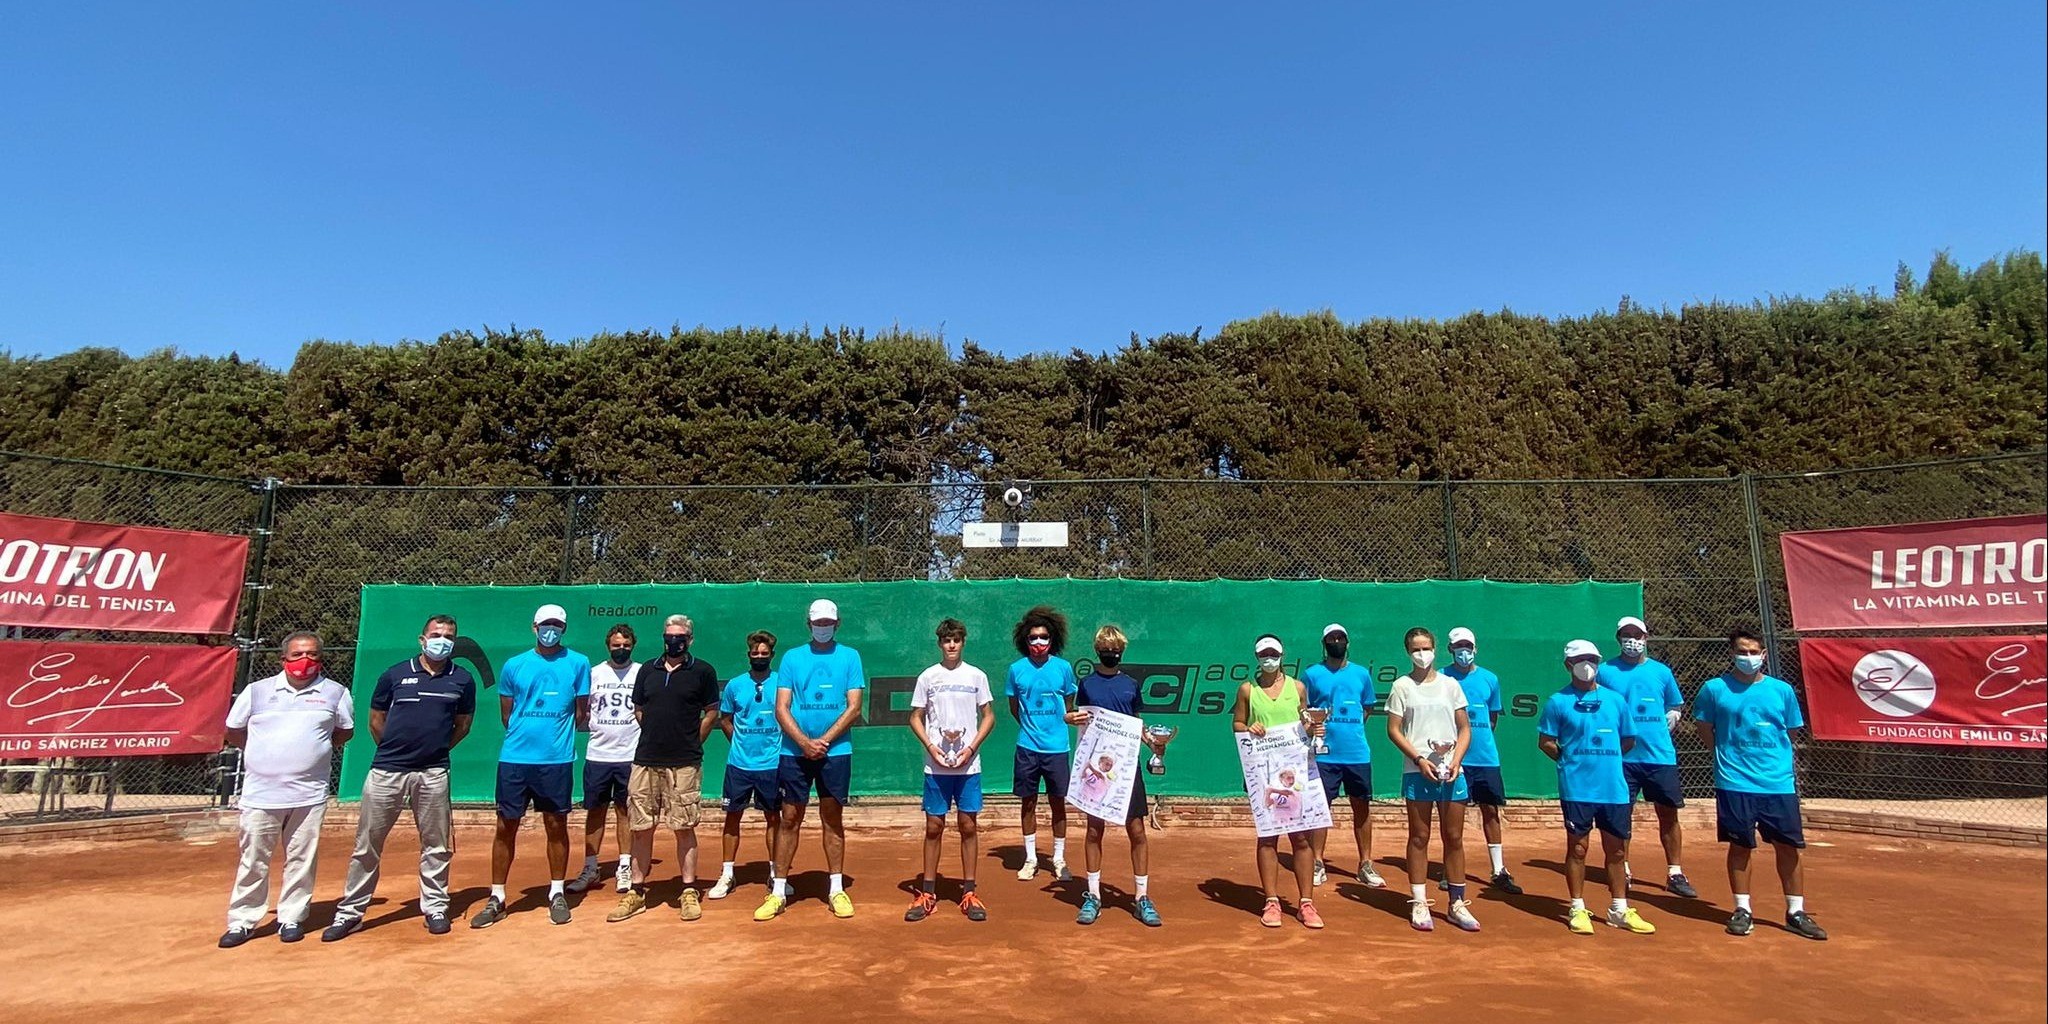 Marina Gatell and Evan Jarzaguet, clinches title Antonio Hernández Cup In Memoriam Tennis Europe u14